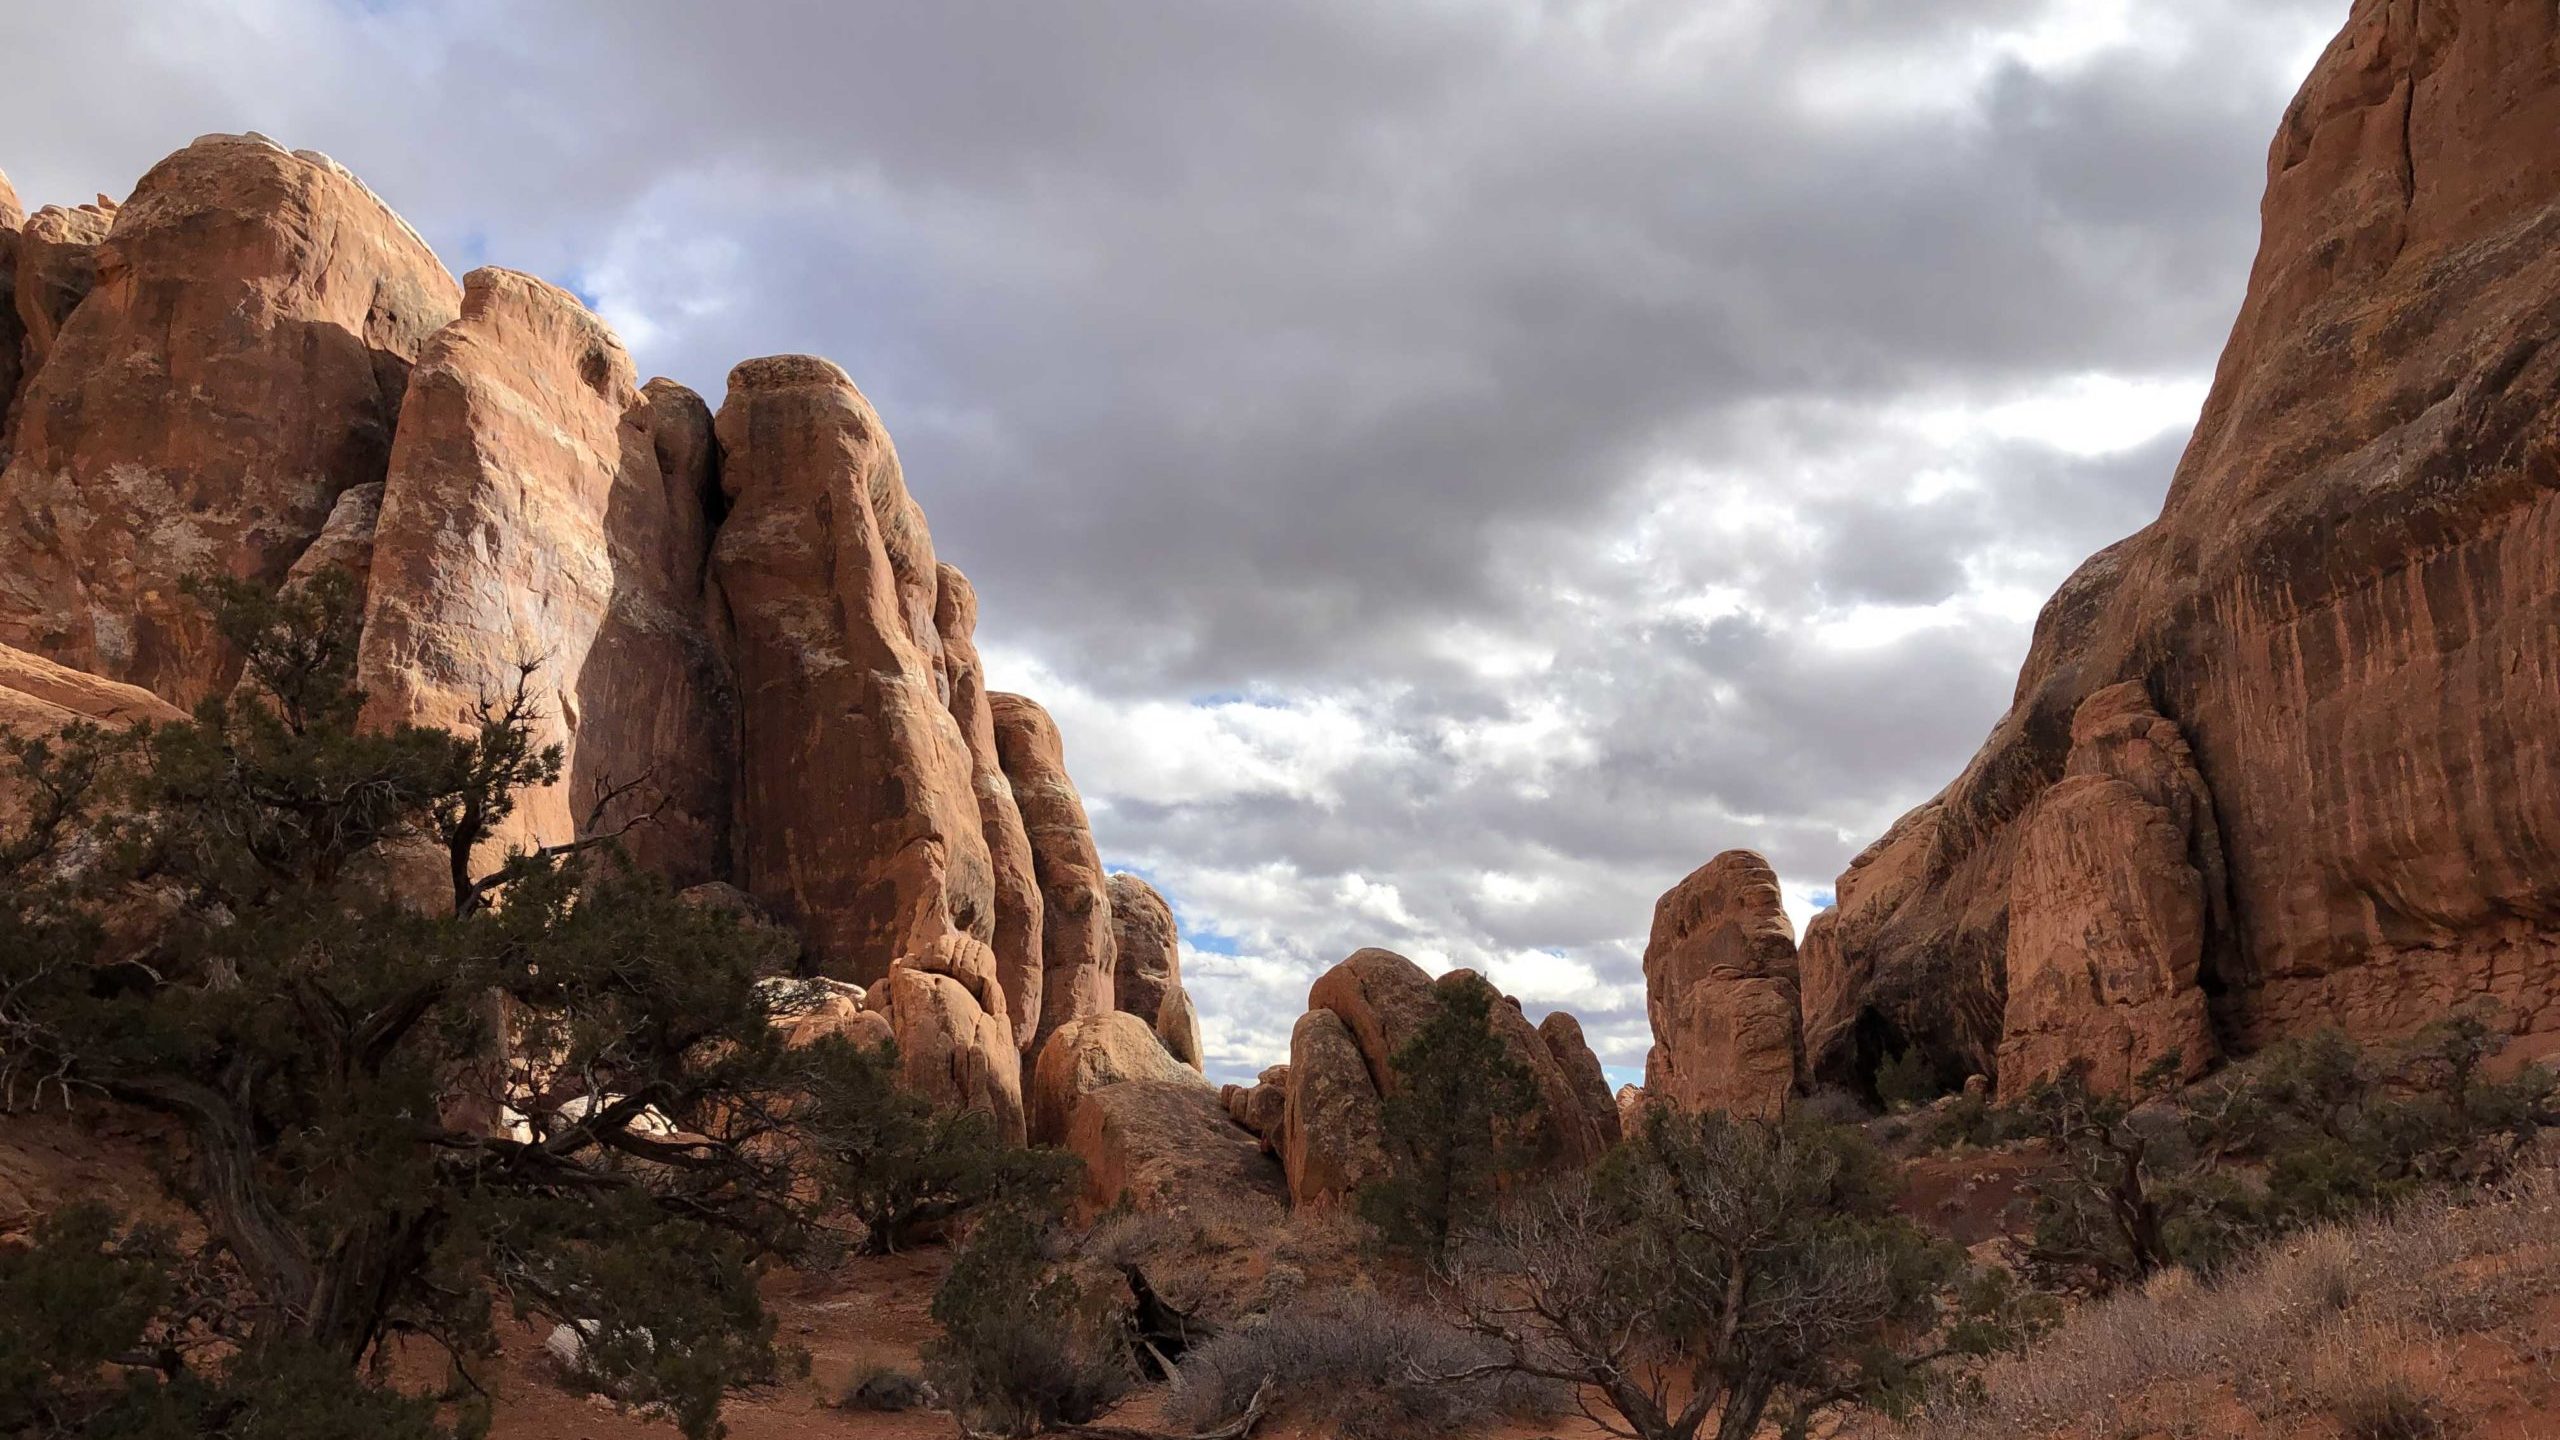 A rock formation at Arches National Park is pictured. Flash flood risk in Arches is high....